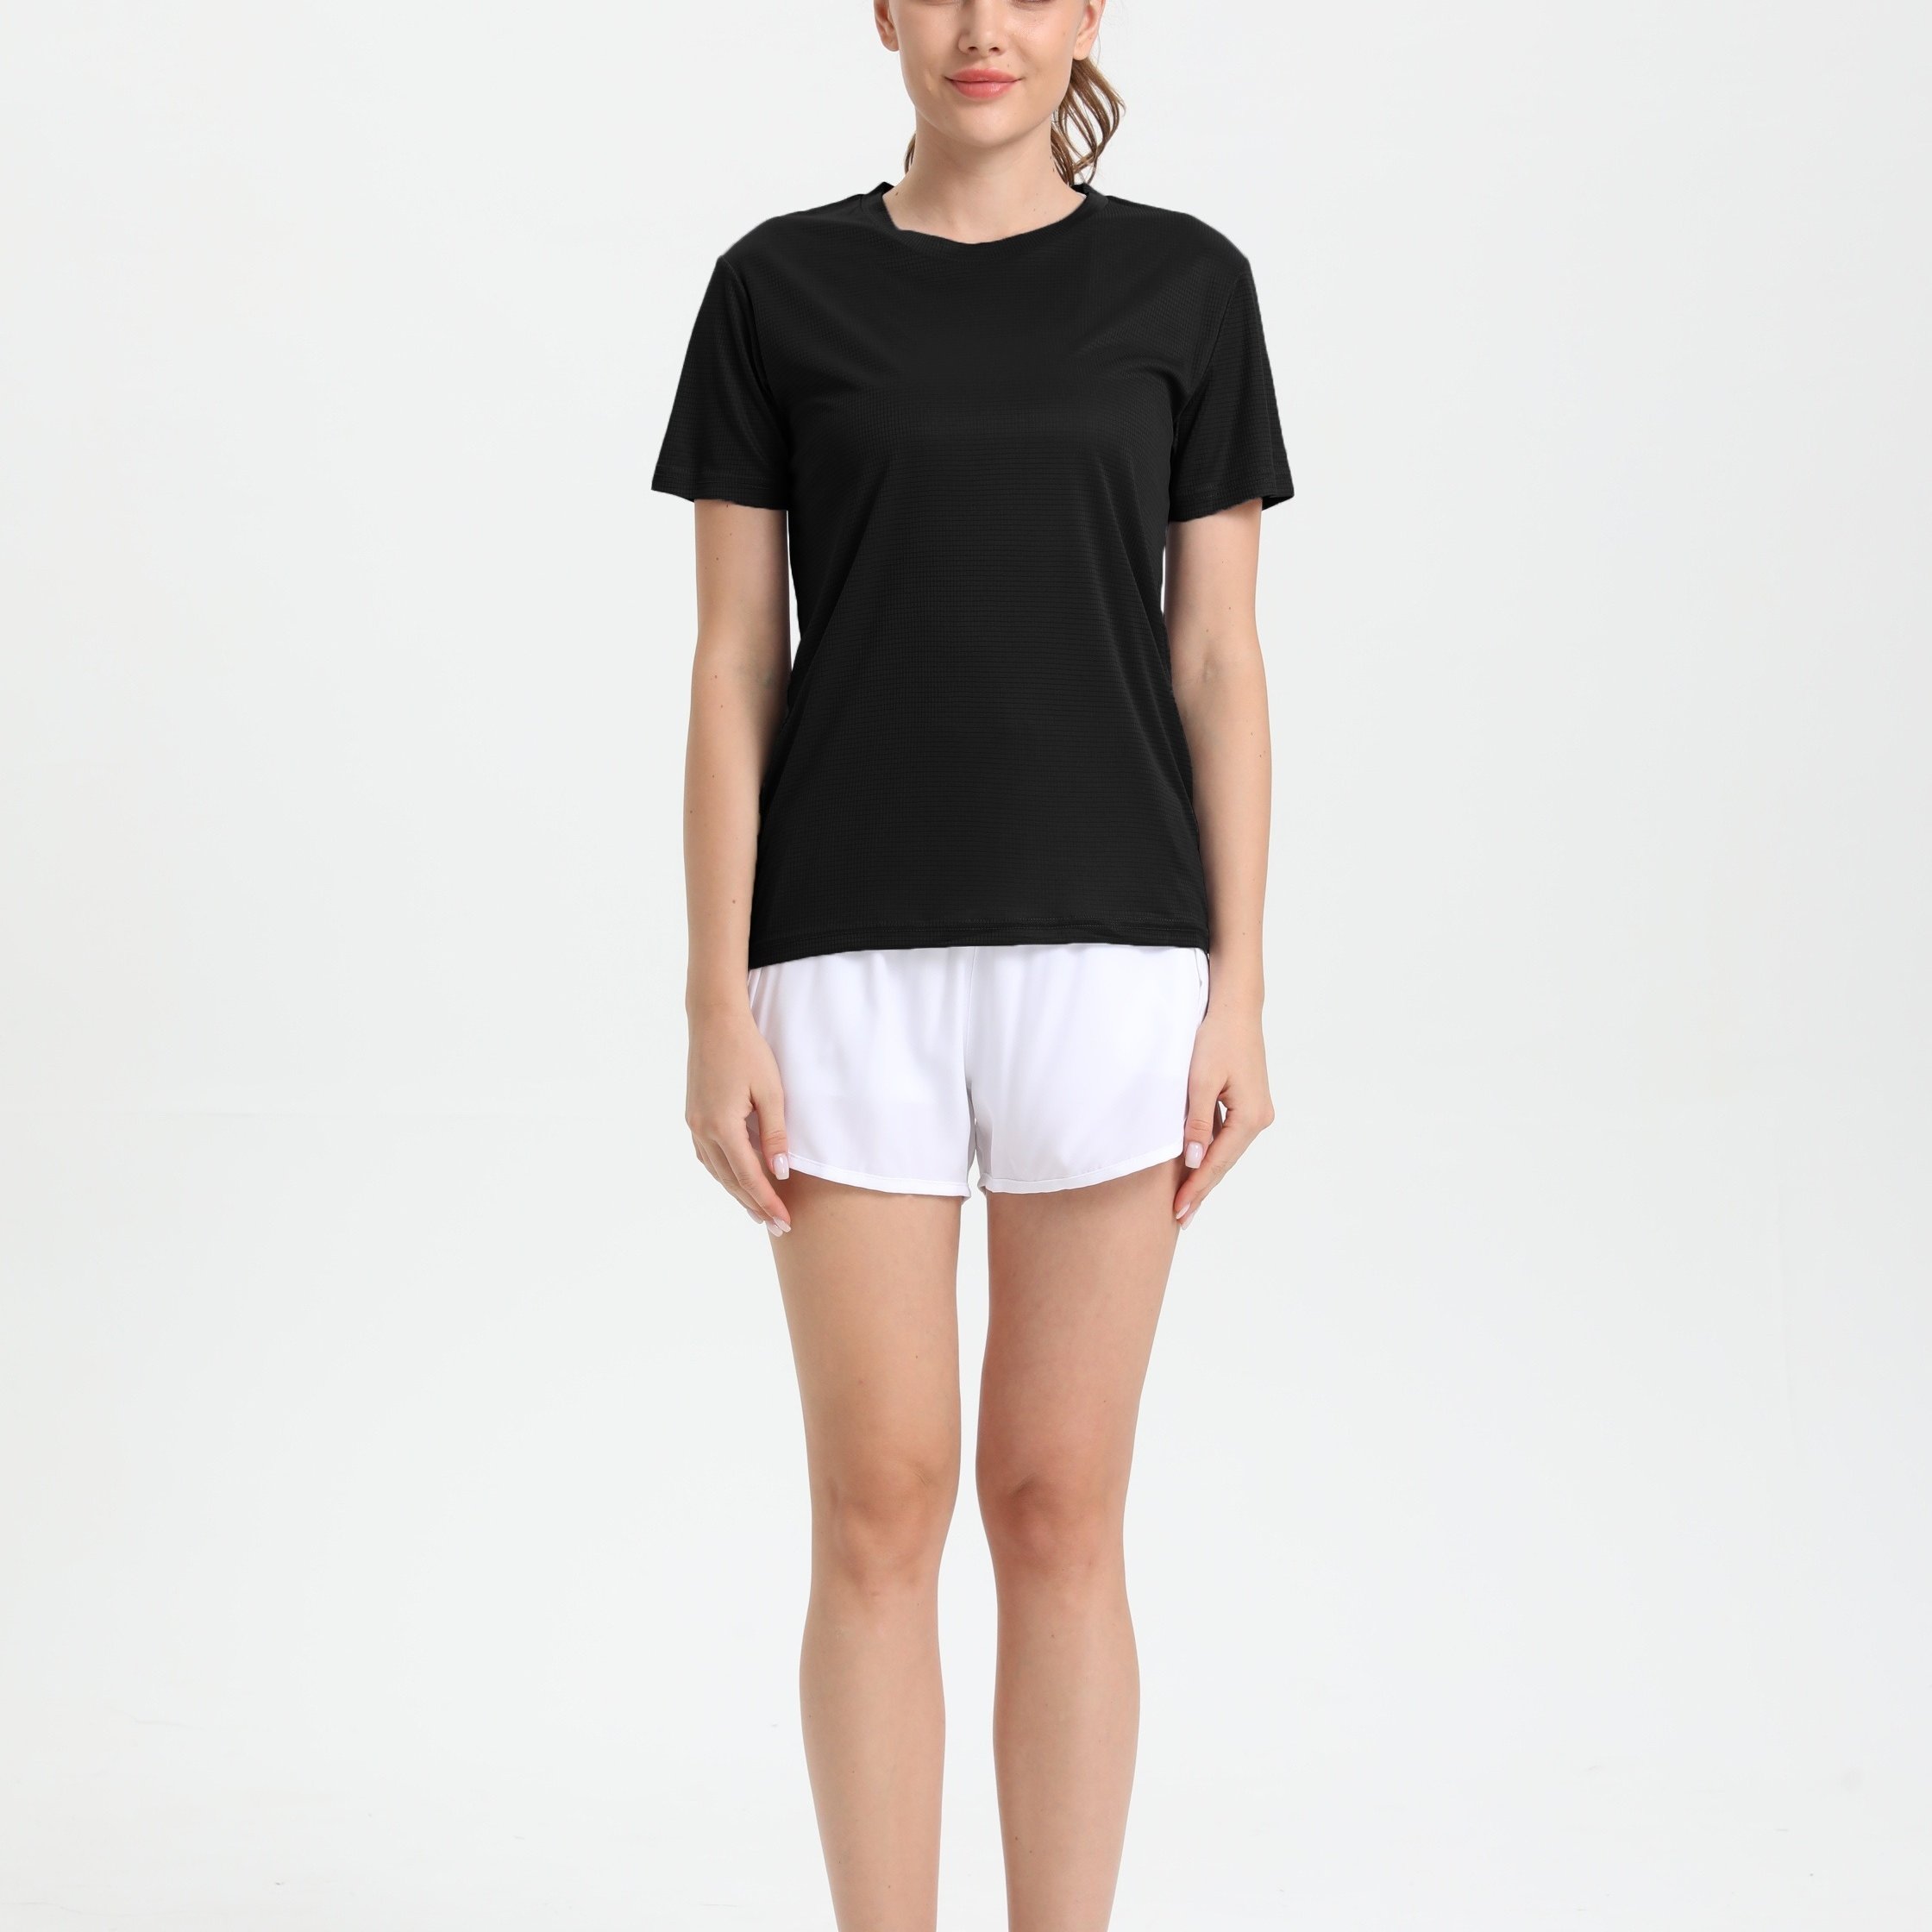 New Summer 90% Polyamide Sports T-Shirt for Women Stretch Fast Dry